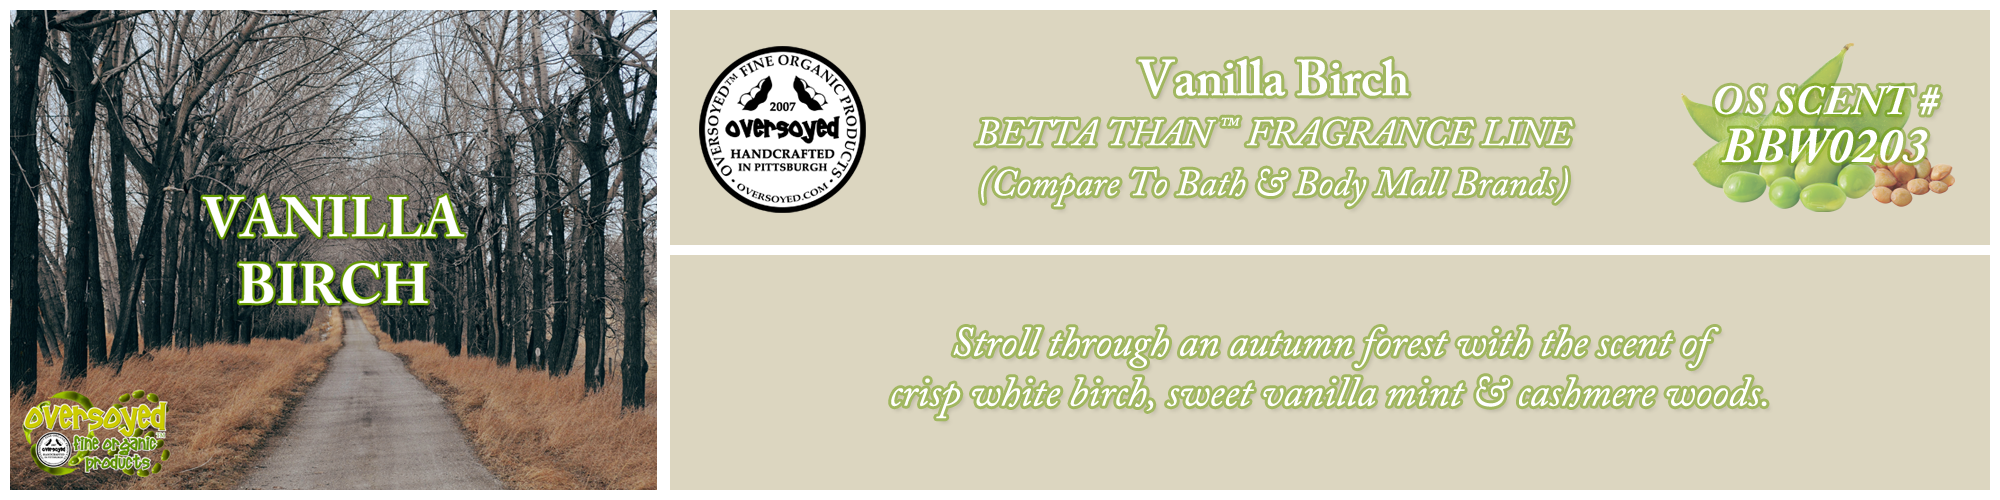 Vanilla Birch Handcrafted Products Collection